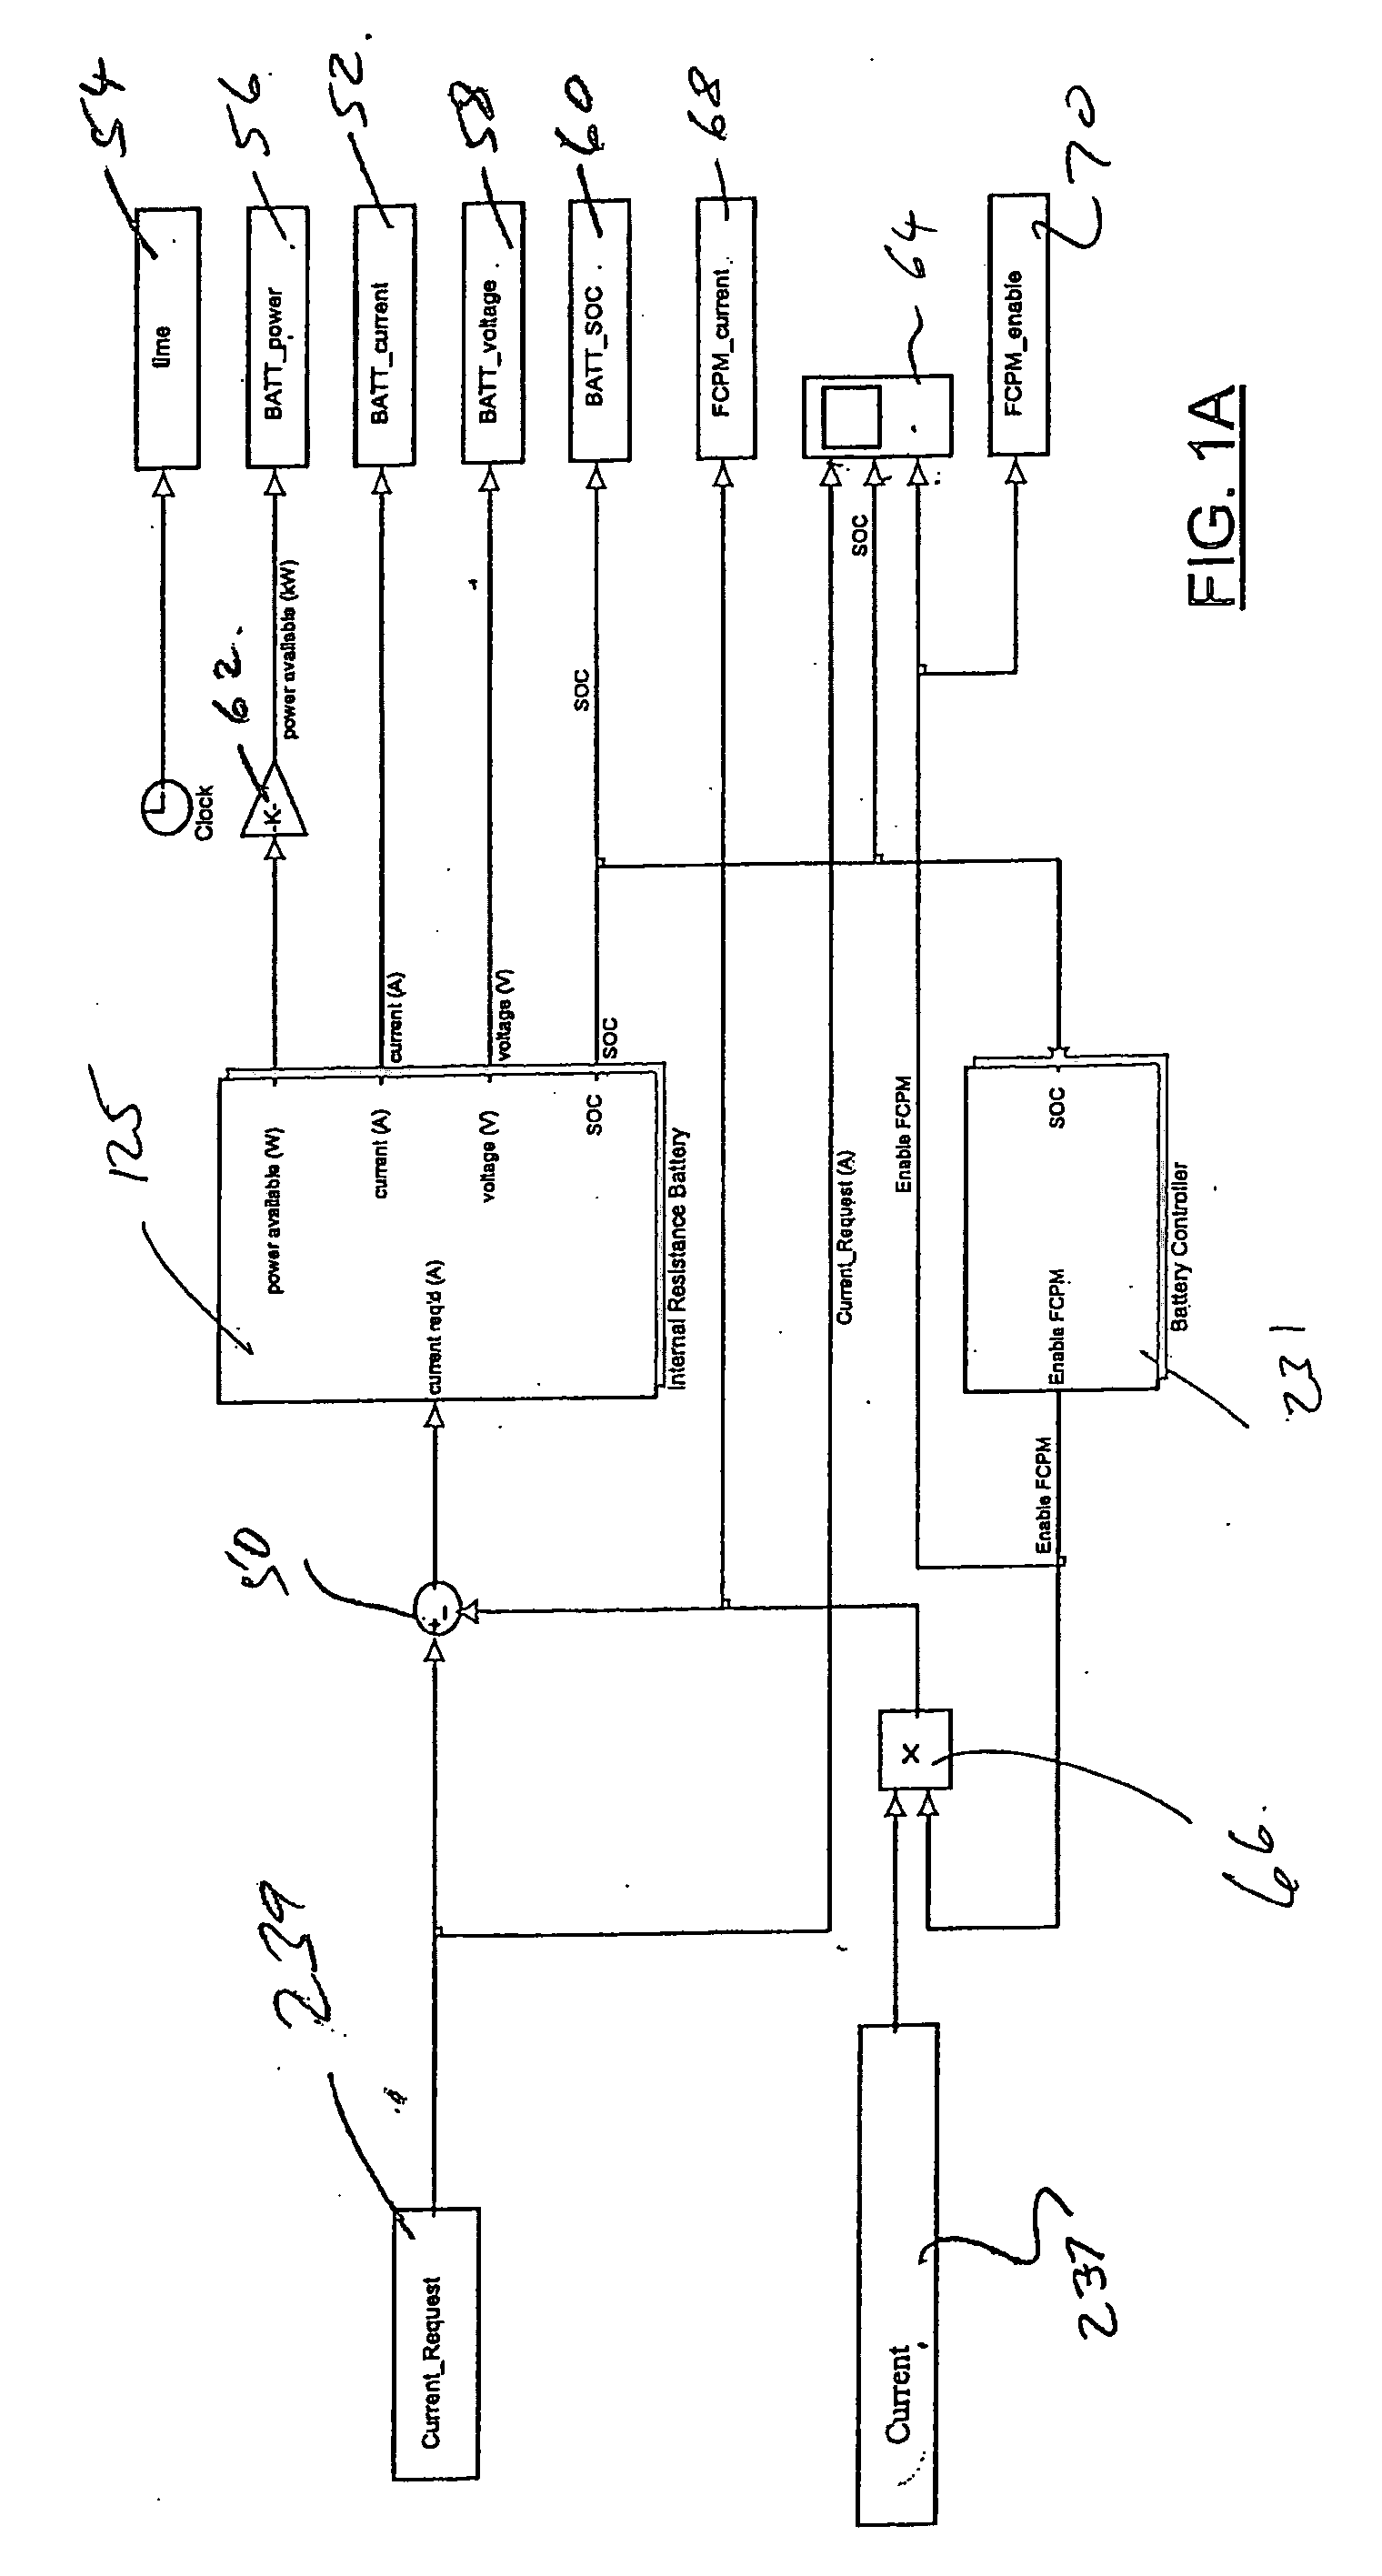 Systems and methods for adaptive energy management in a fuel cell system